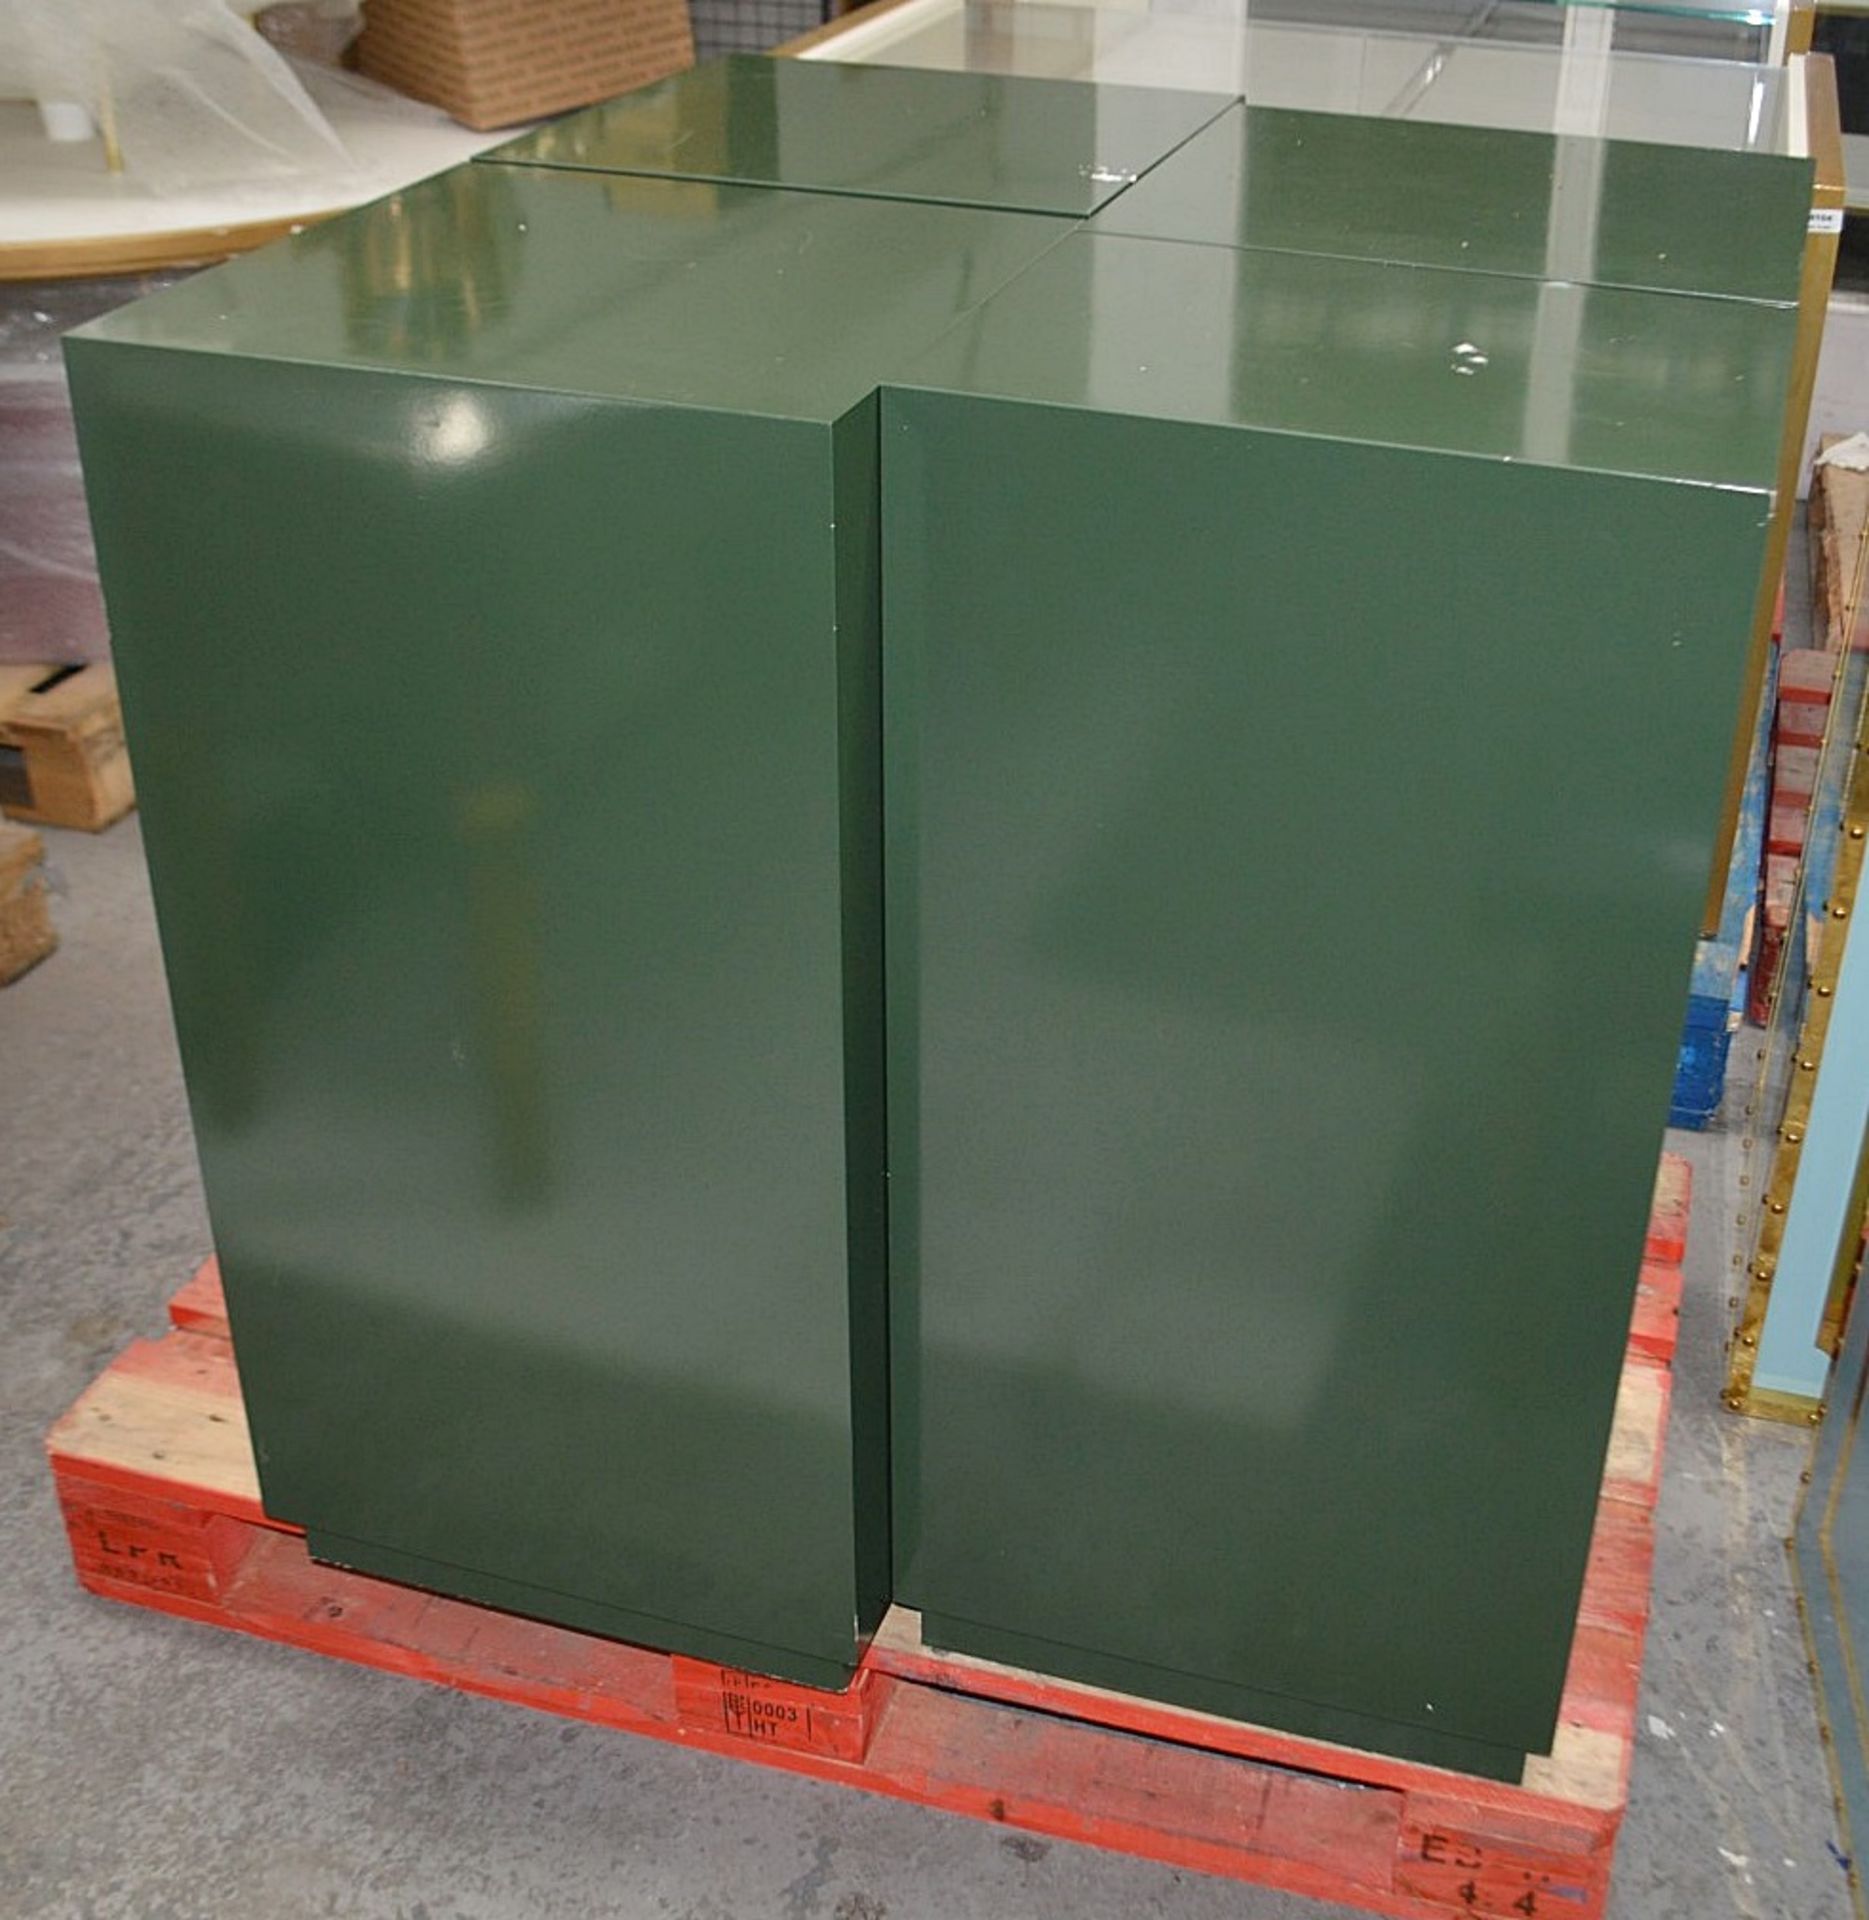 5 x Display Plinths Of Varying Sizes From A World-Renowned London Department Store In A Signature